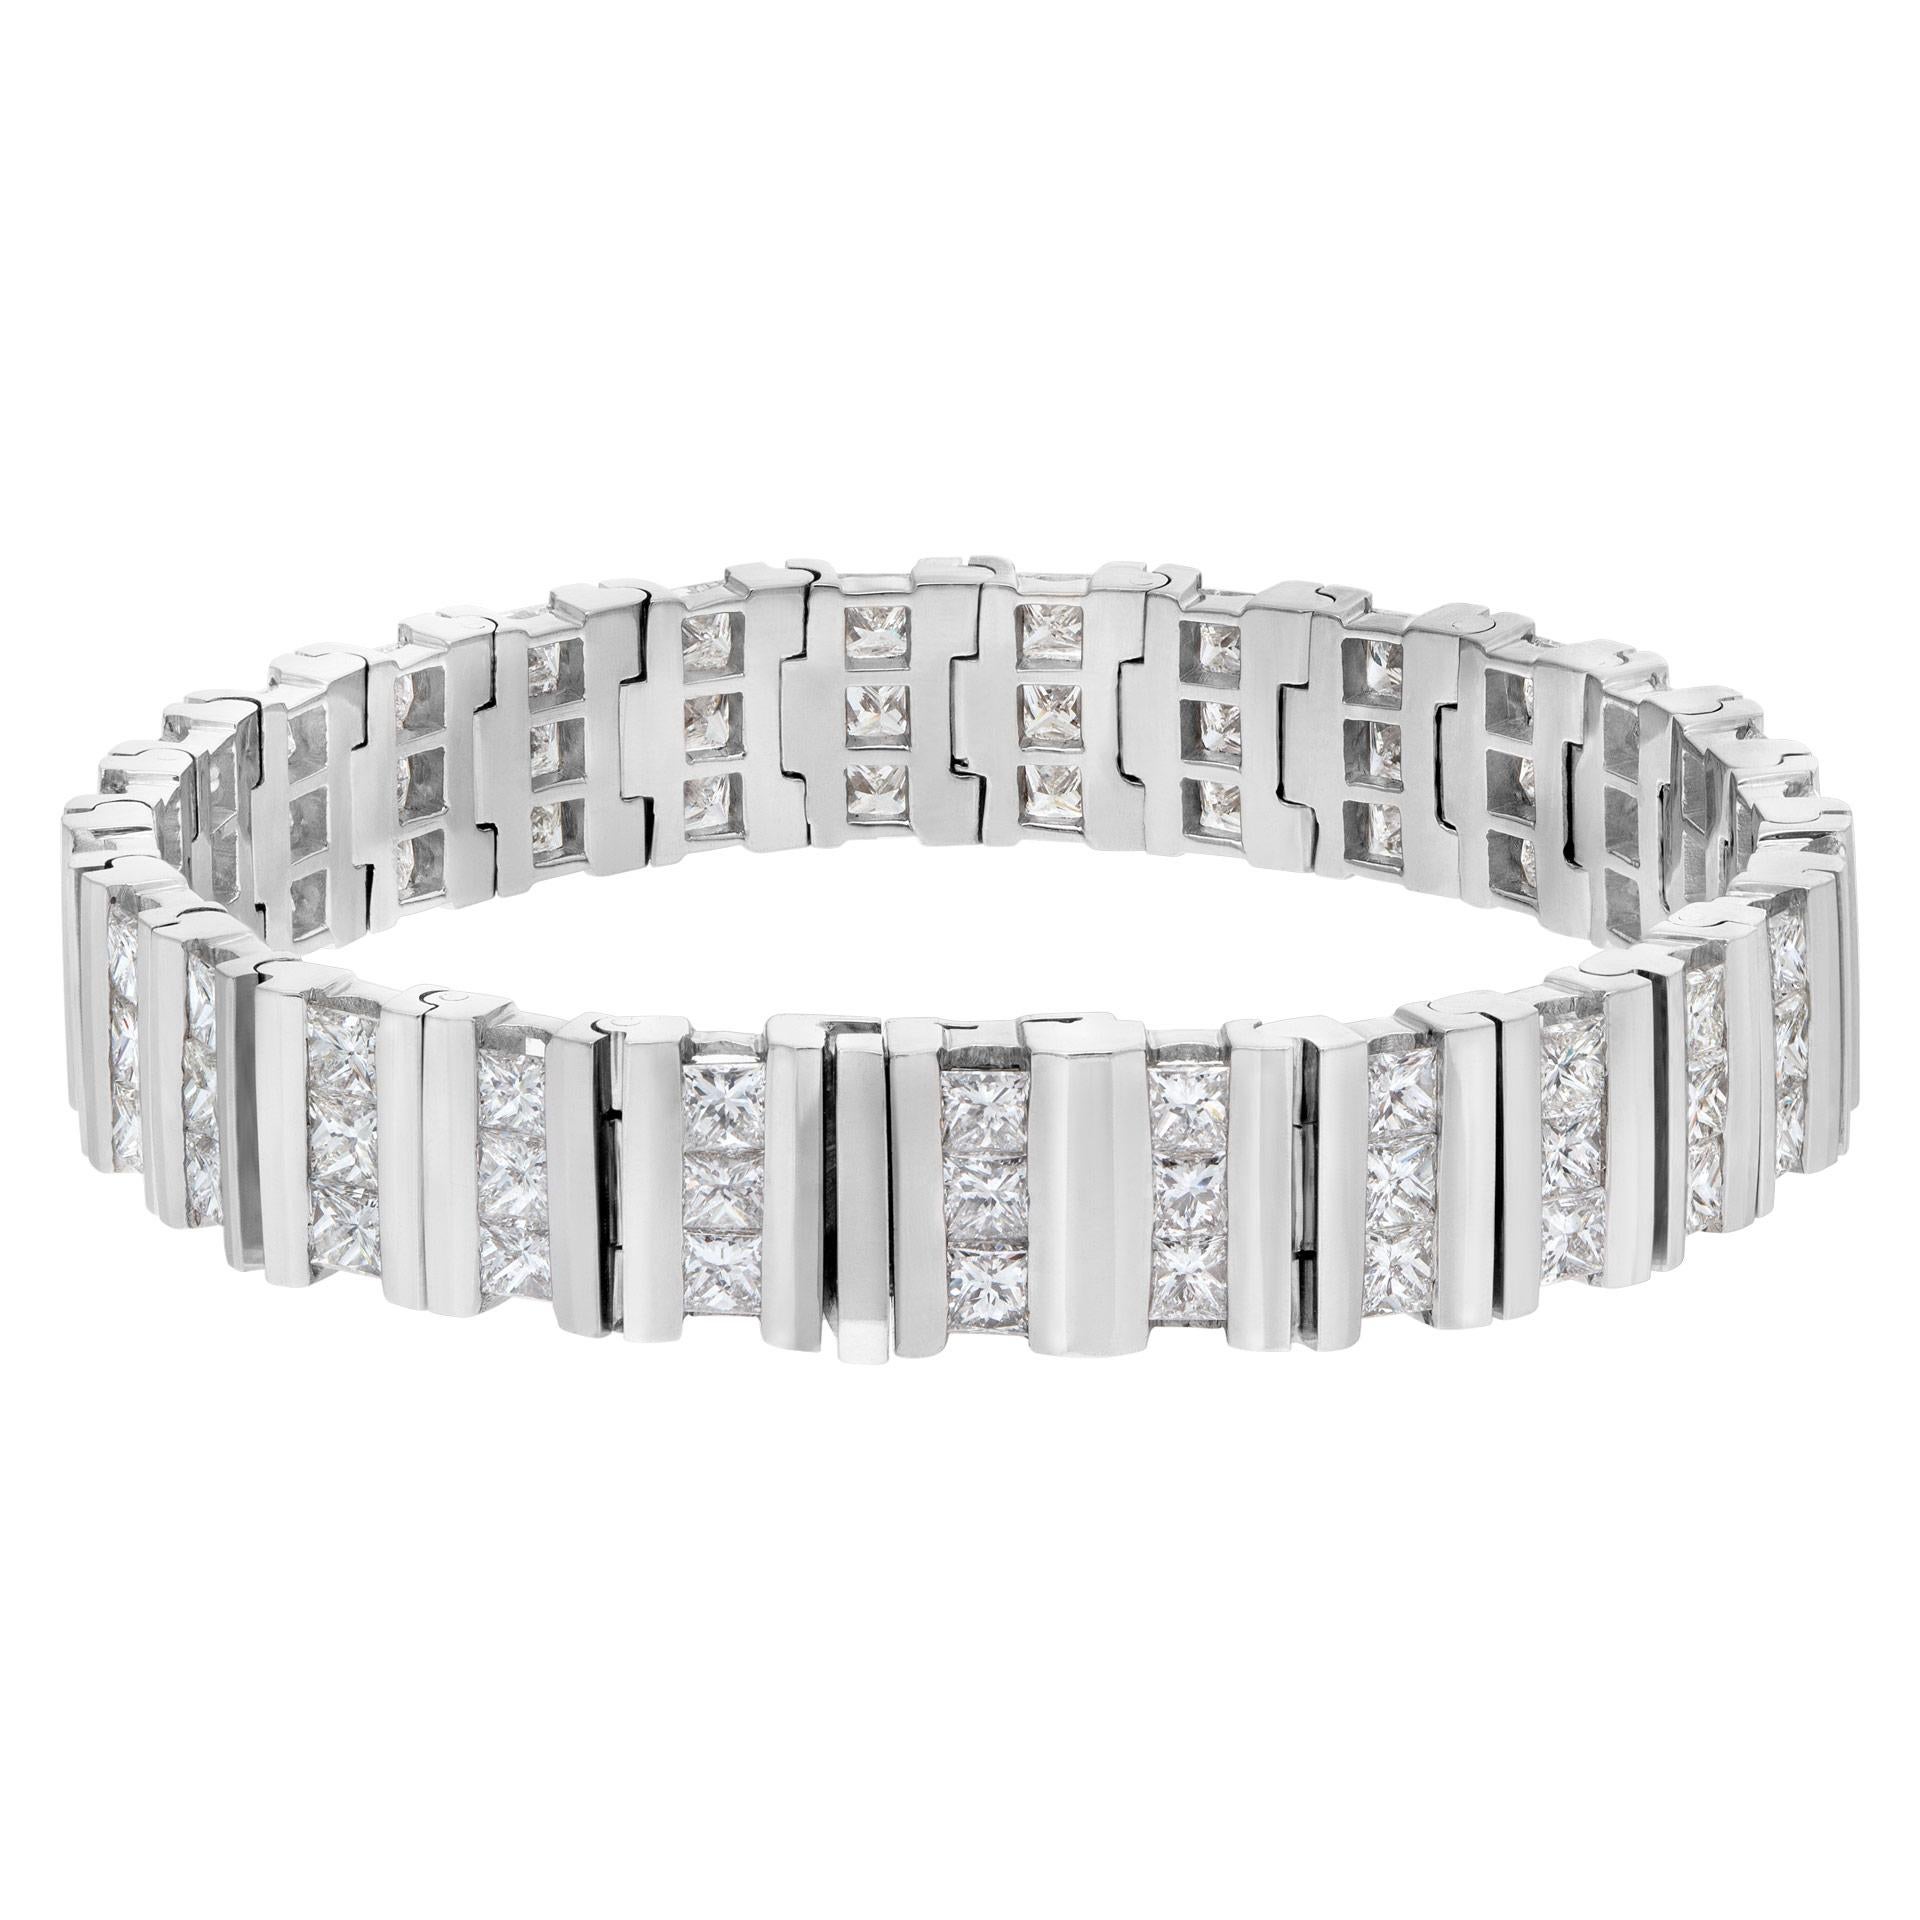 Princess Cut Channel Set Diamond Bracelet in 18k White Gold with over 16.20 In Excellent Condition For Sale In Surfside, FL